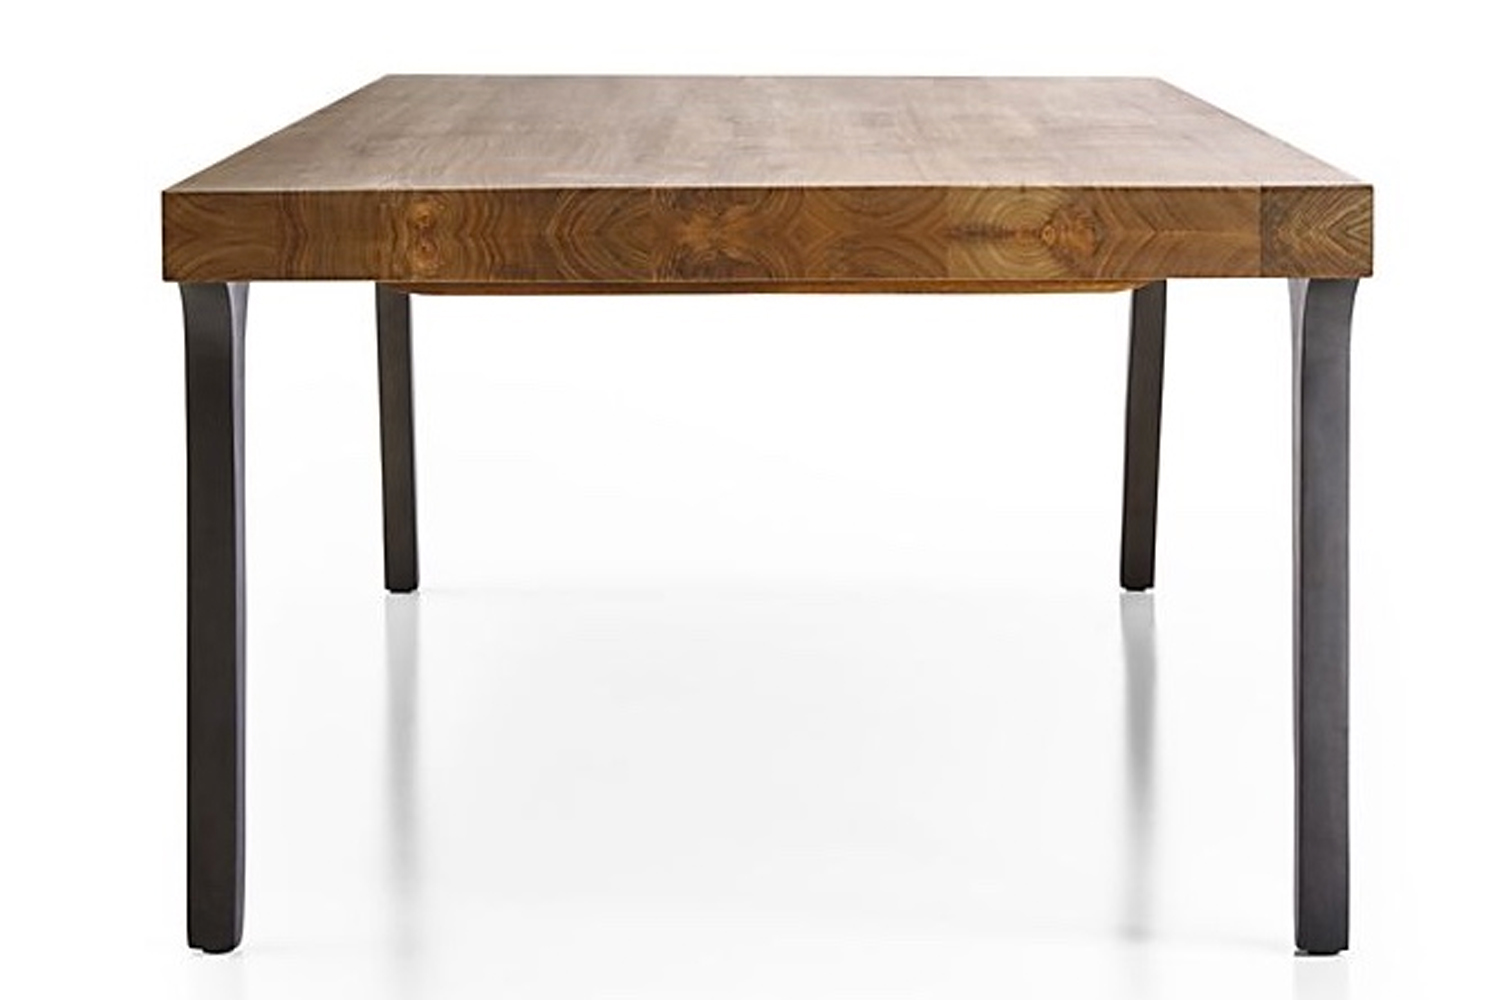 Crate  Barrel launched the Lakin recycled teak coffee table which combines a recycled wood top with metal legs 